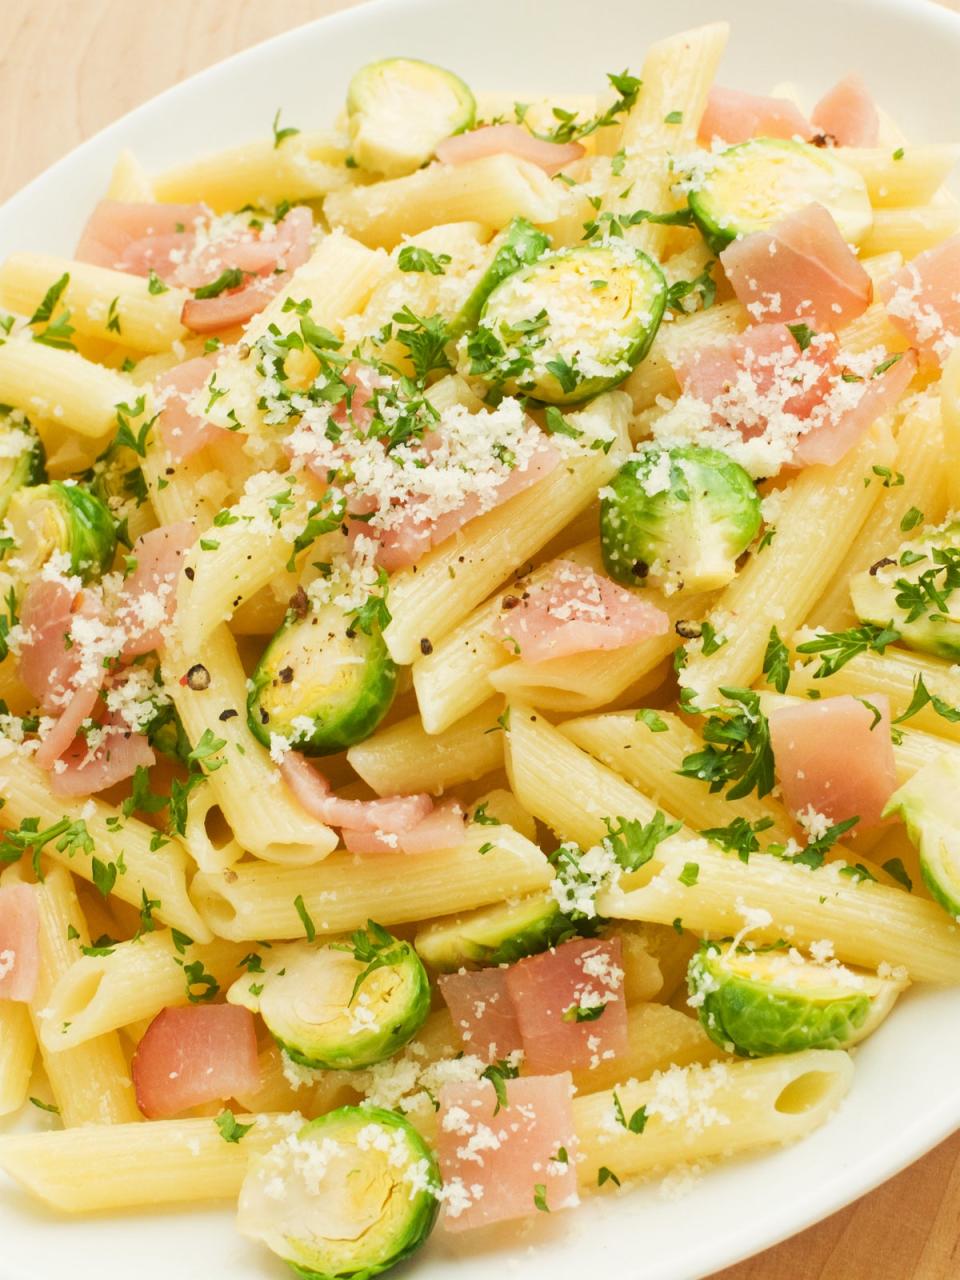 Pasta and Brussels sprouts make a good pair (Getty/iStock)